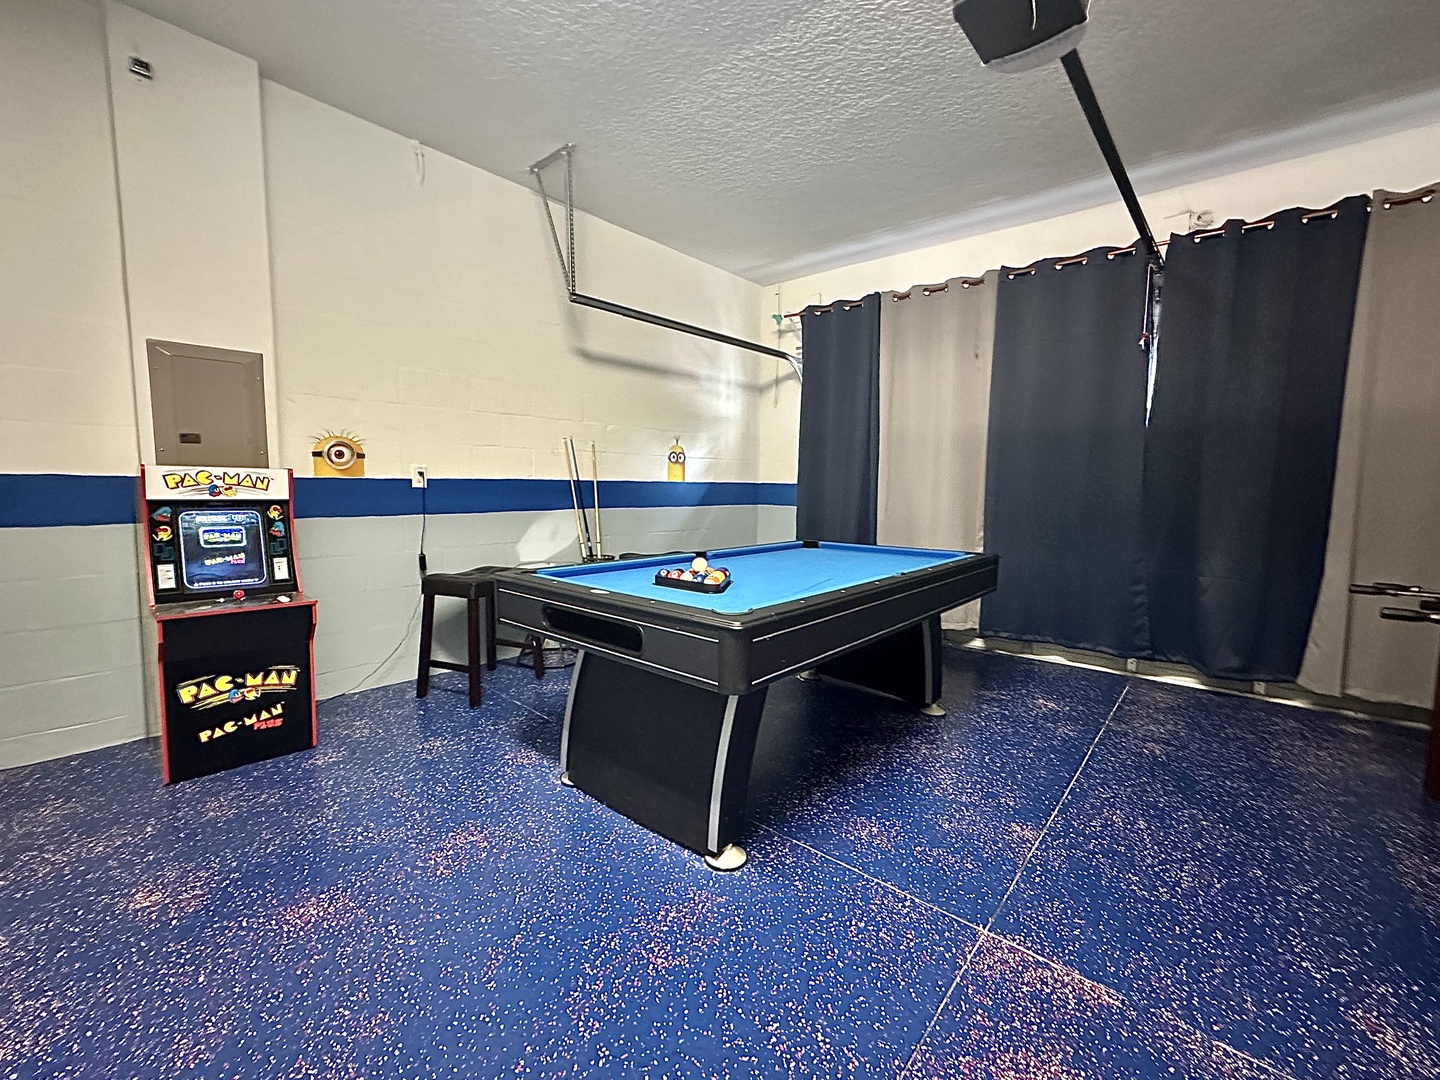 Garage game room for great indoor entertainment!